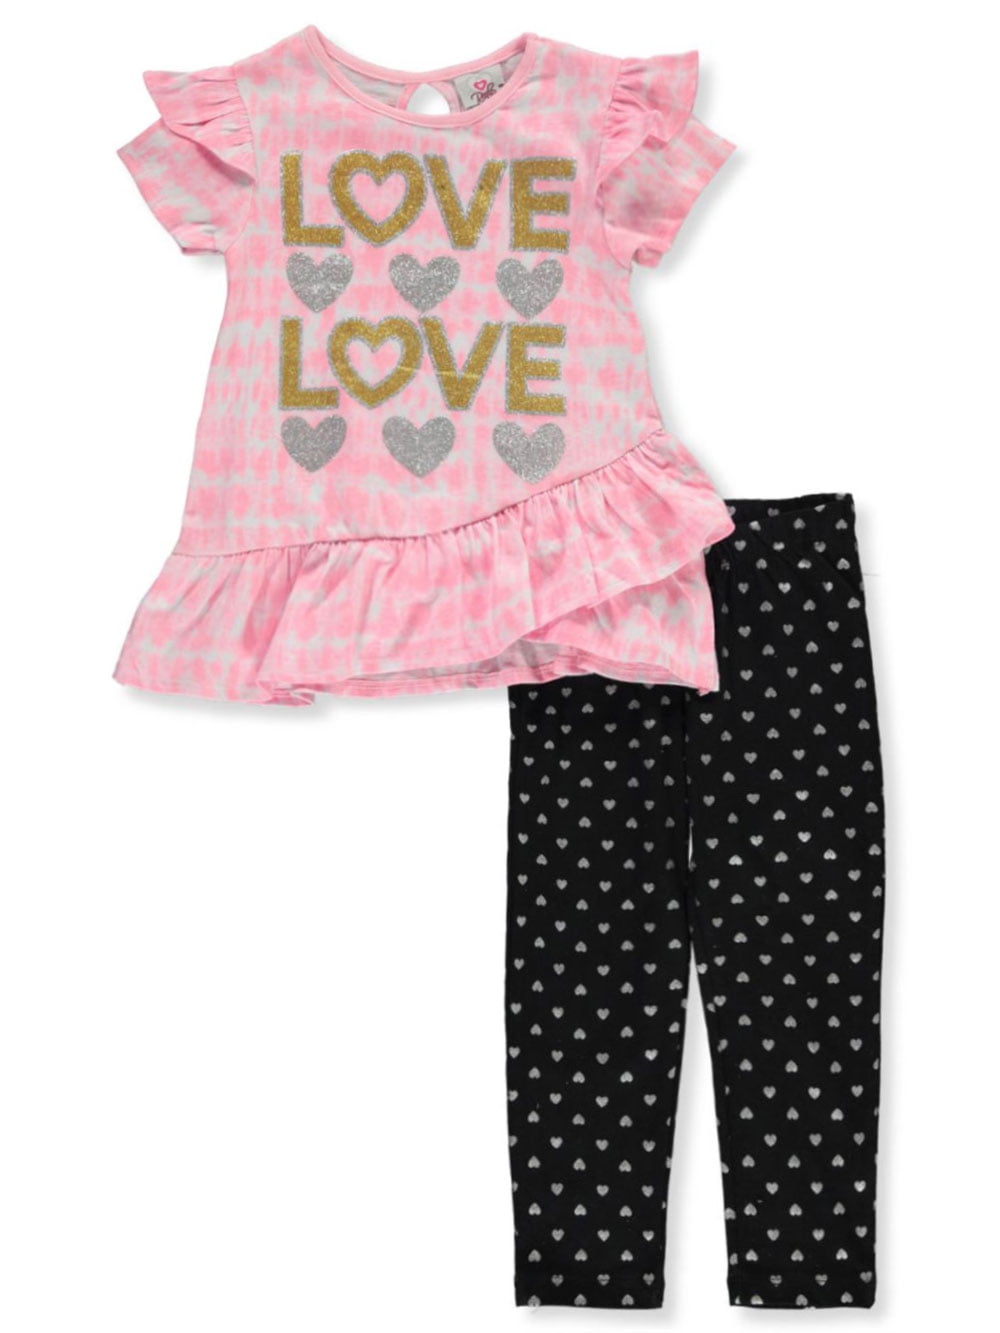 Real Love Girls' 2-Piece Leggings Set Outfit 